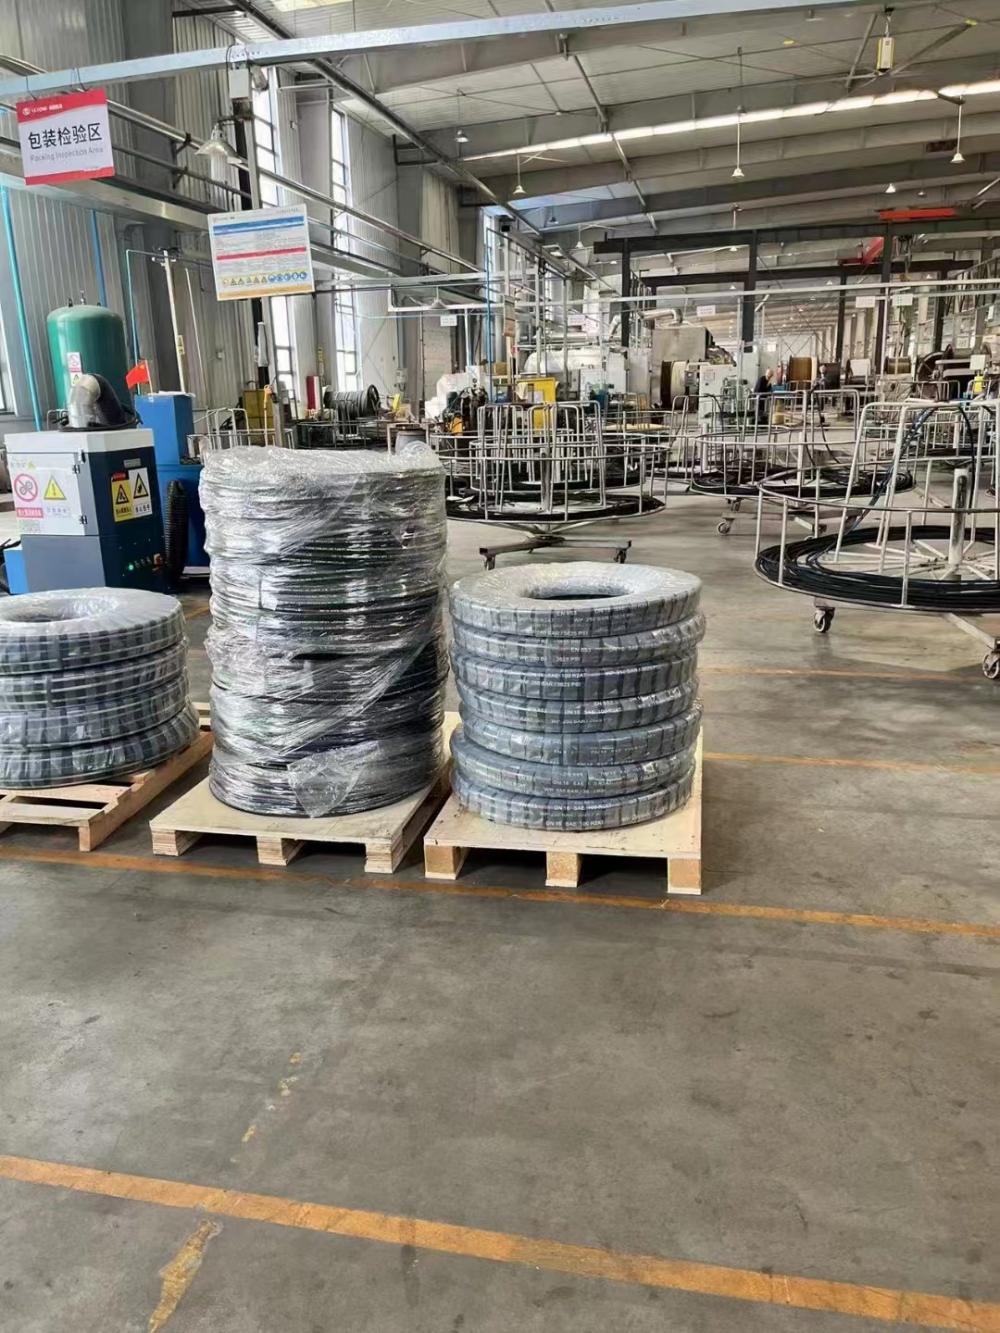 PTFE multifunctional oil conveying hose